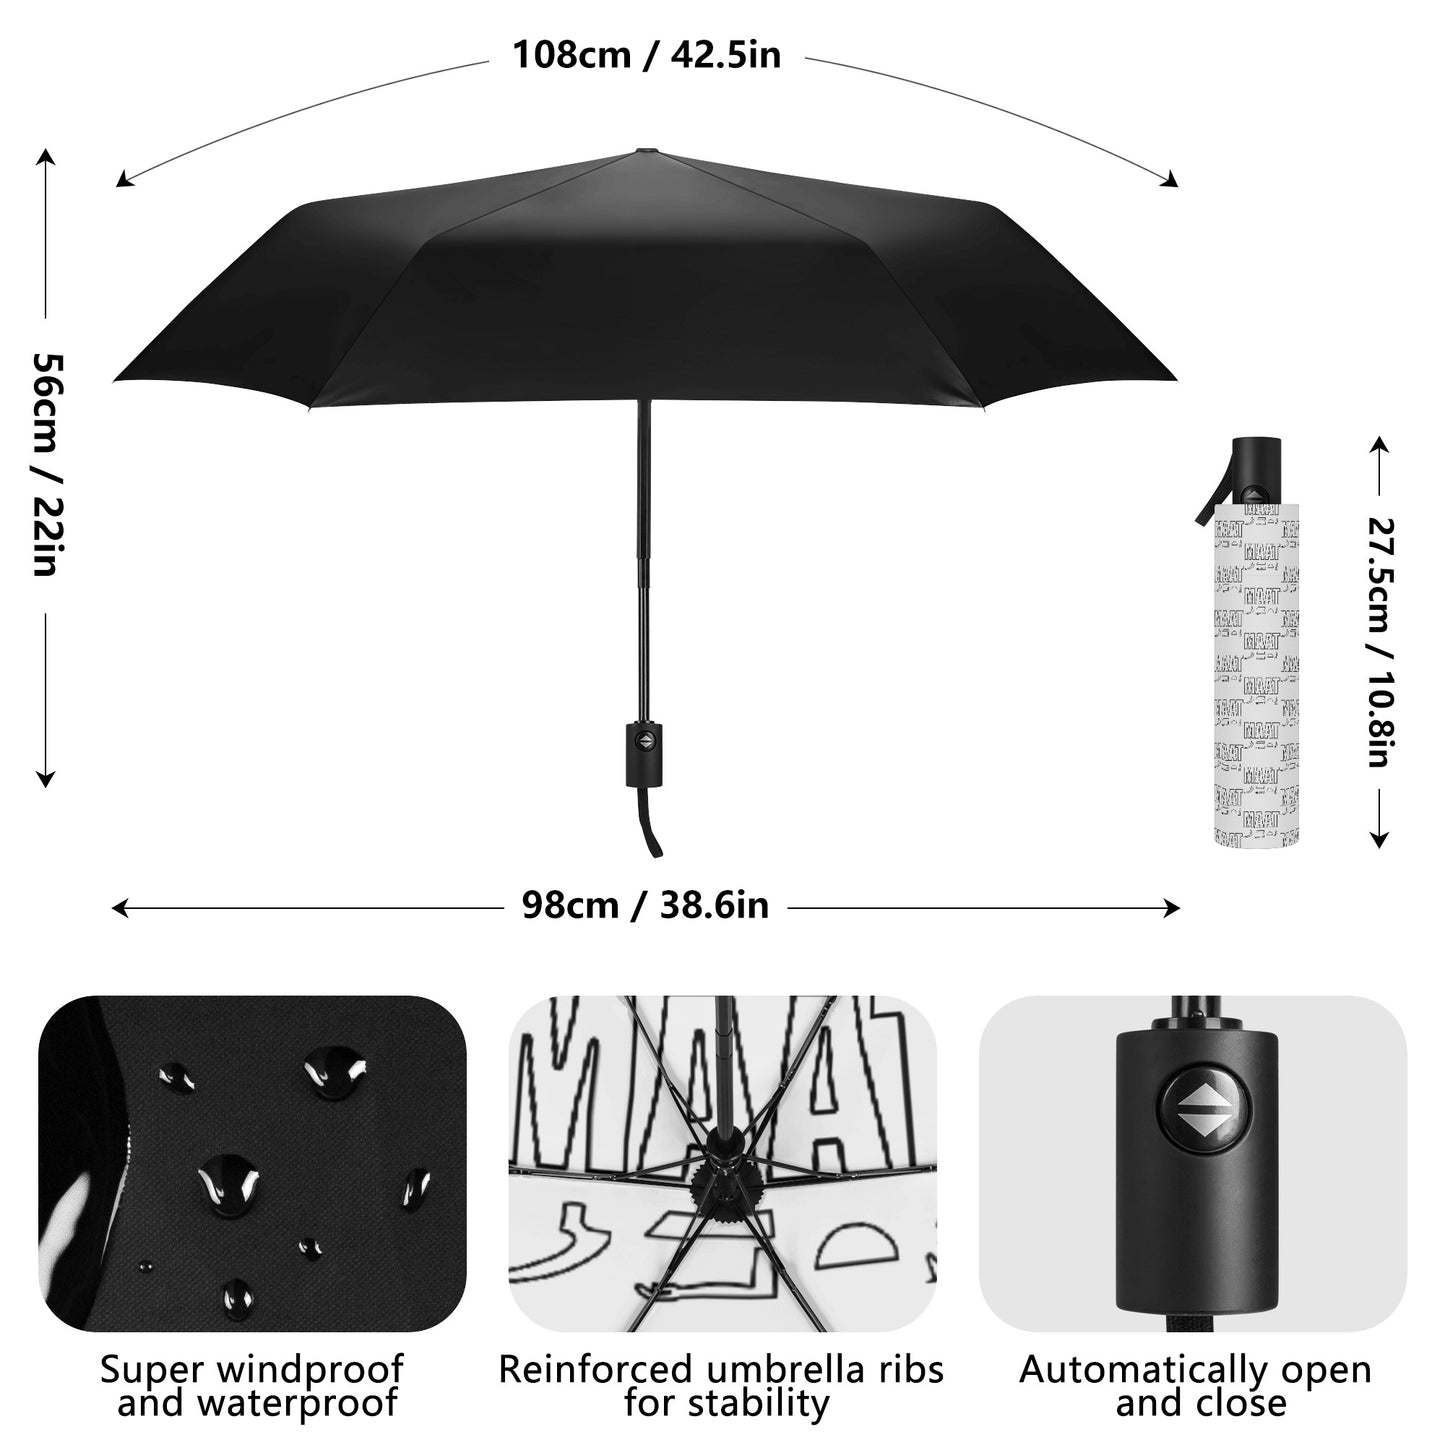 MAAT FOREVER Fully Auto Open & Close Umbrella (Inside)